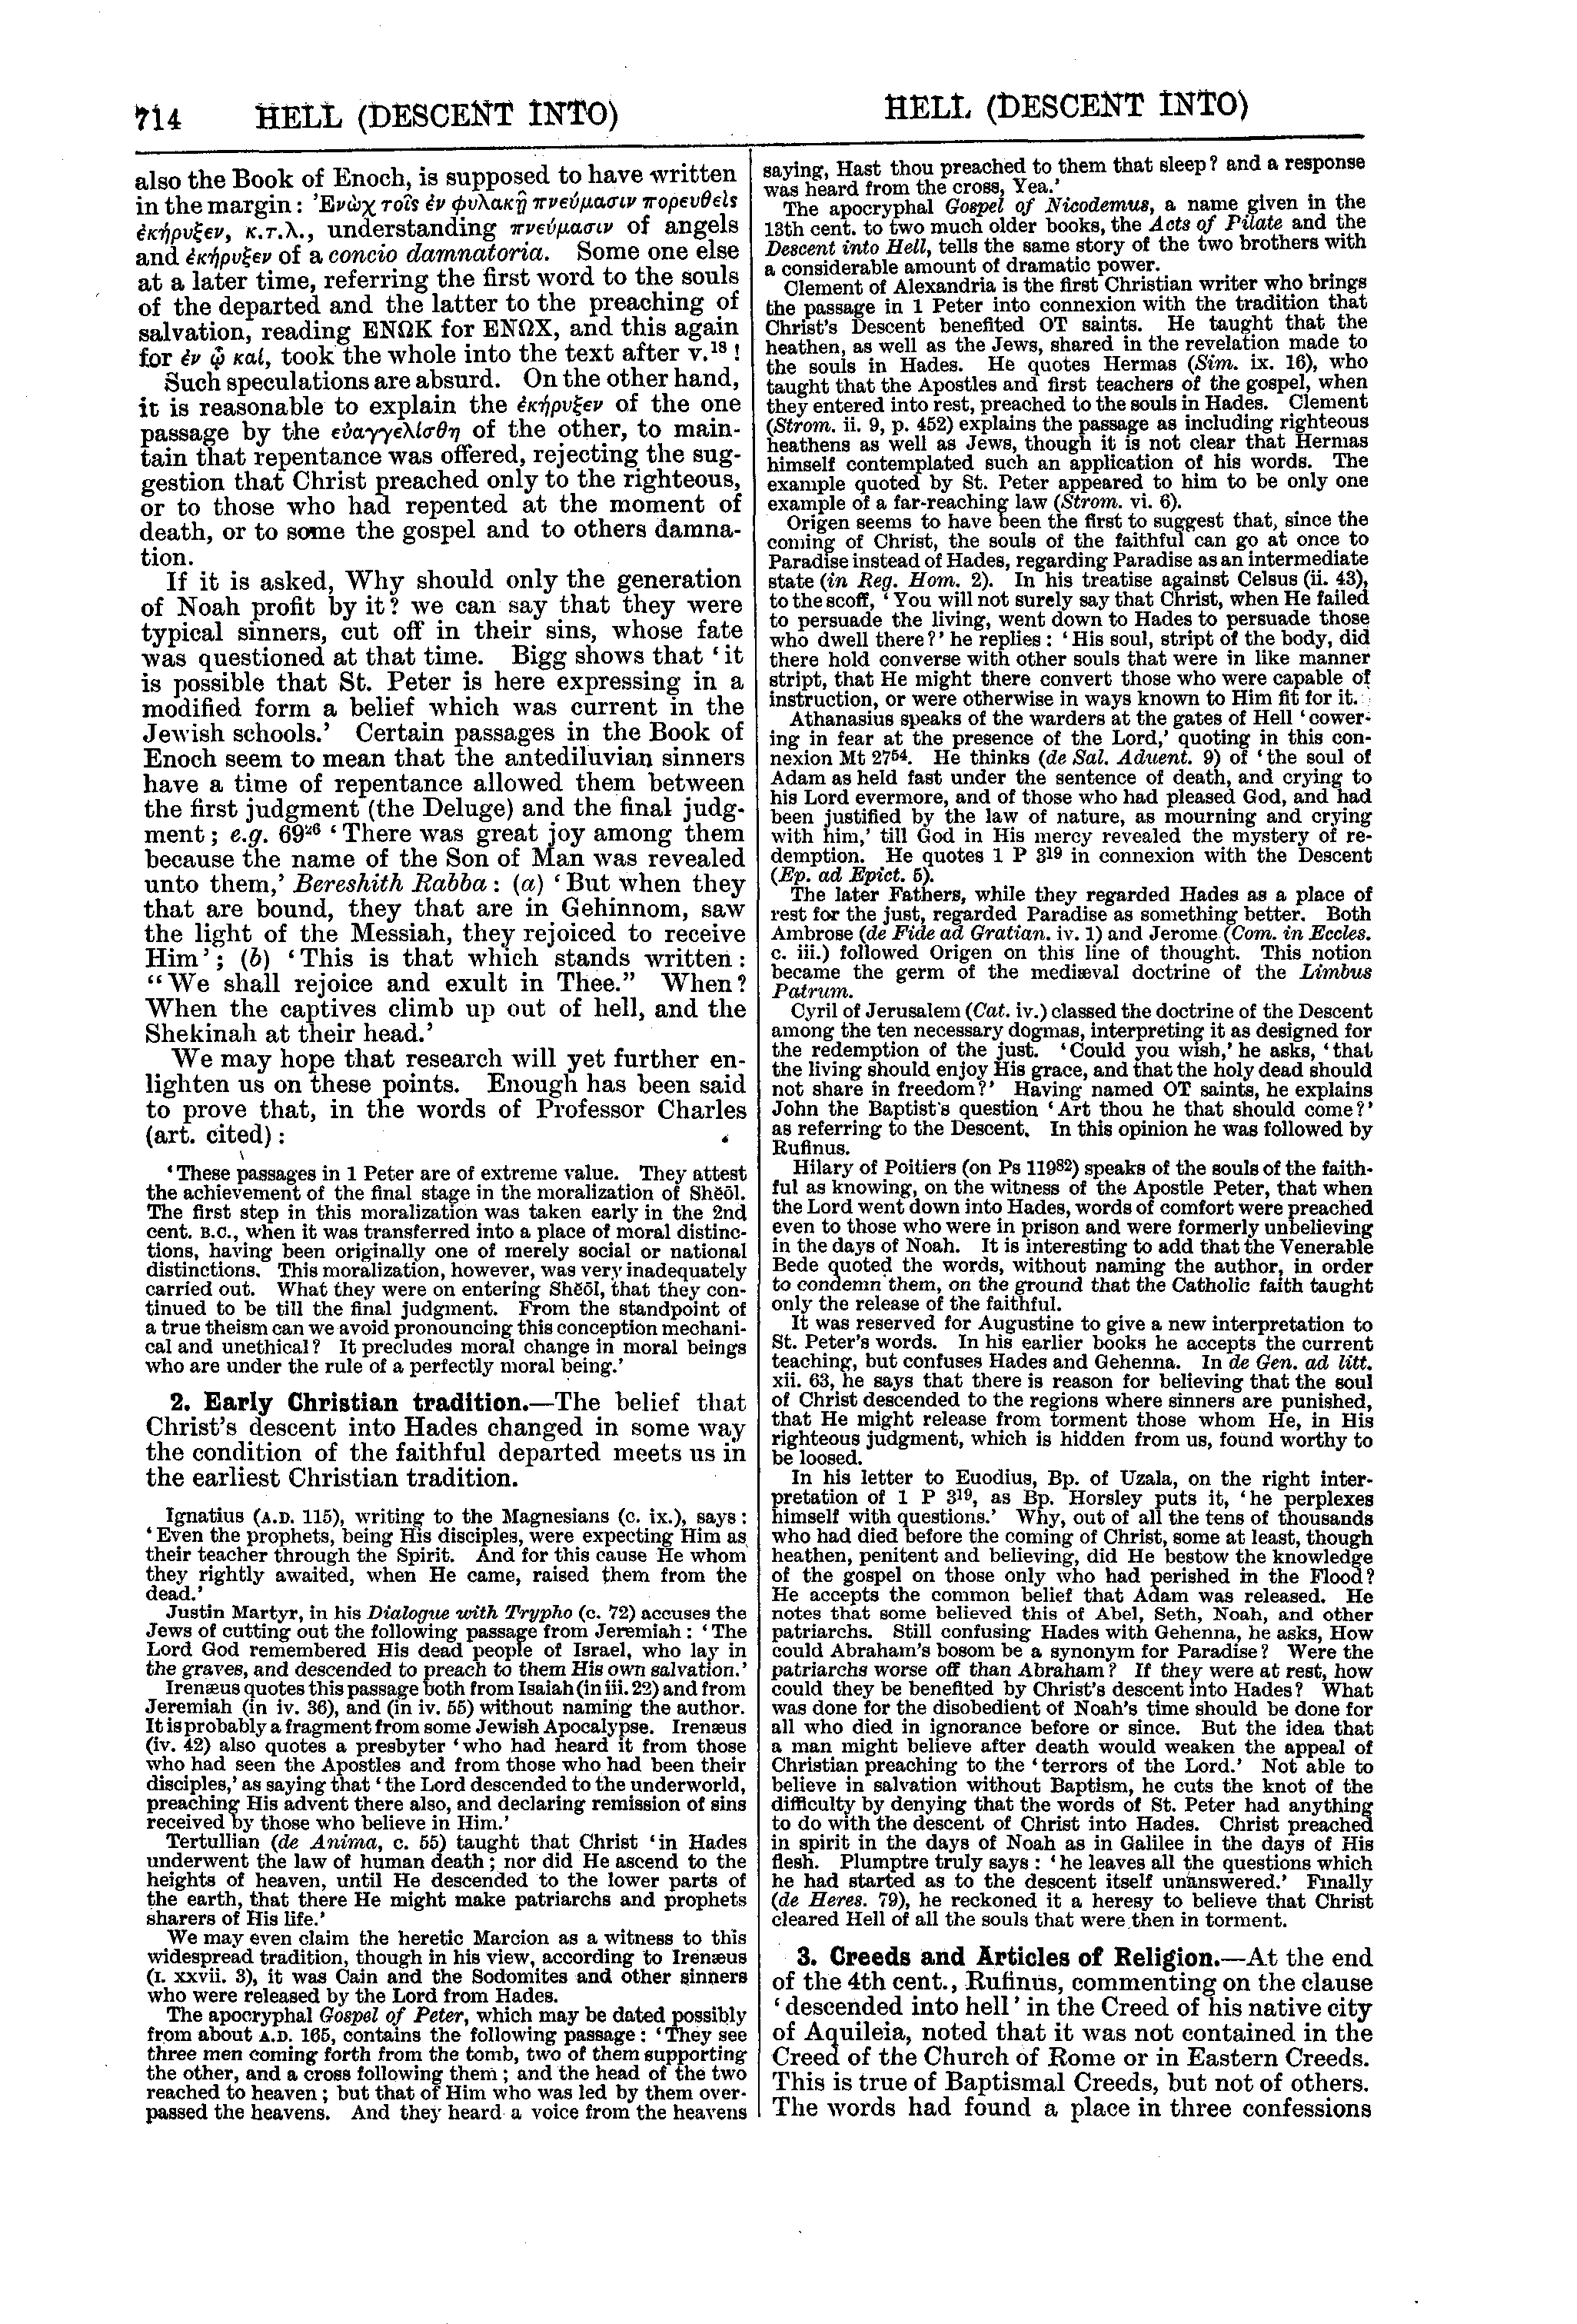 Image of page 714